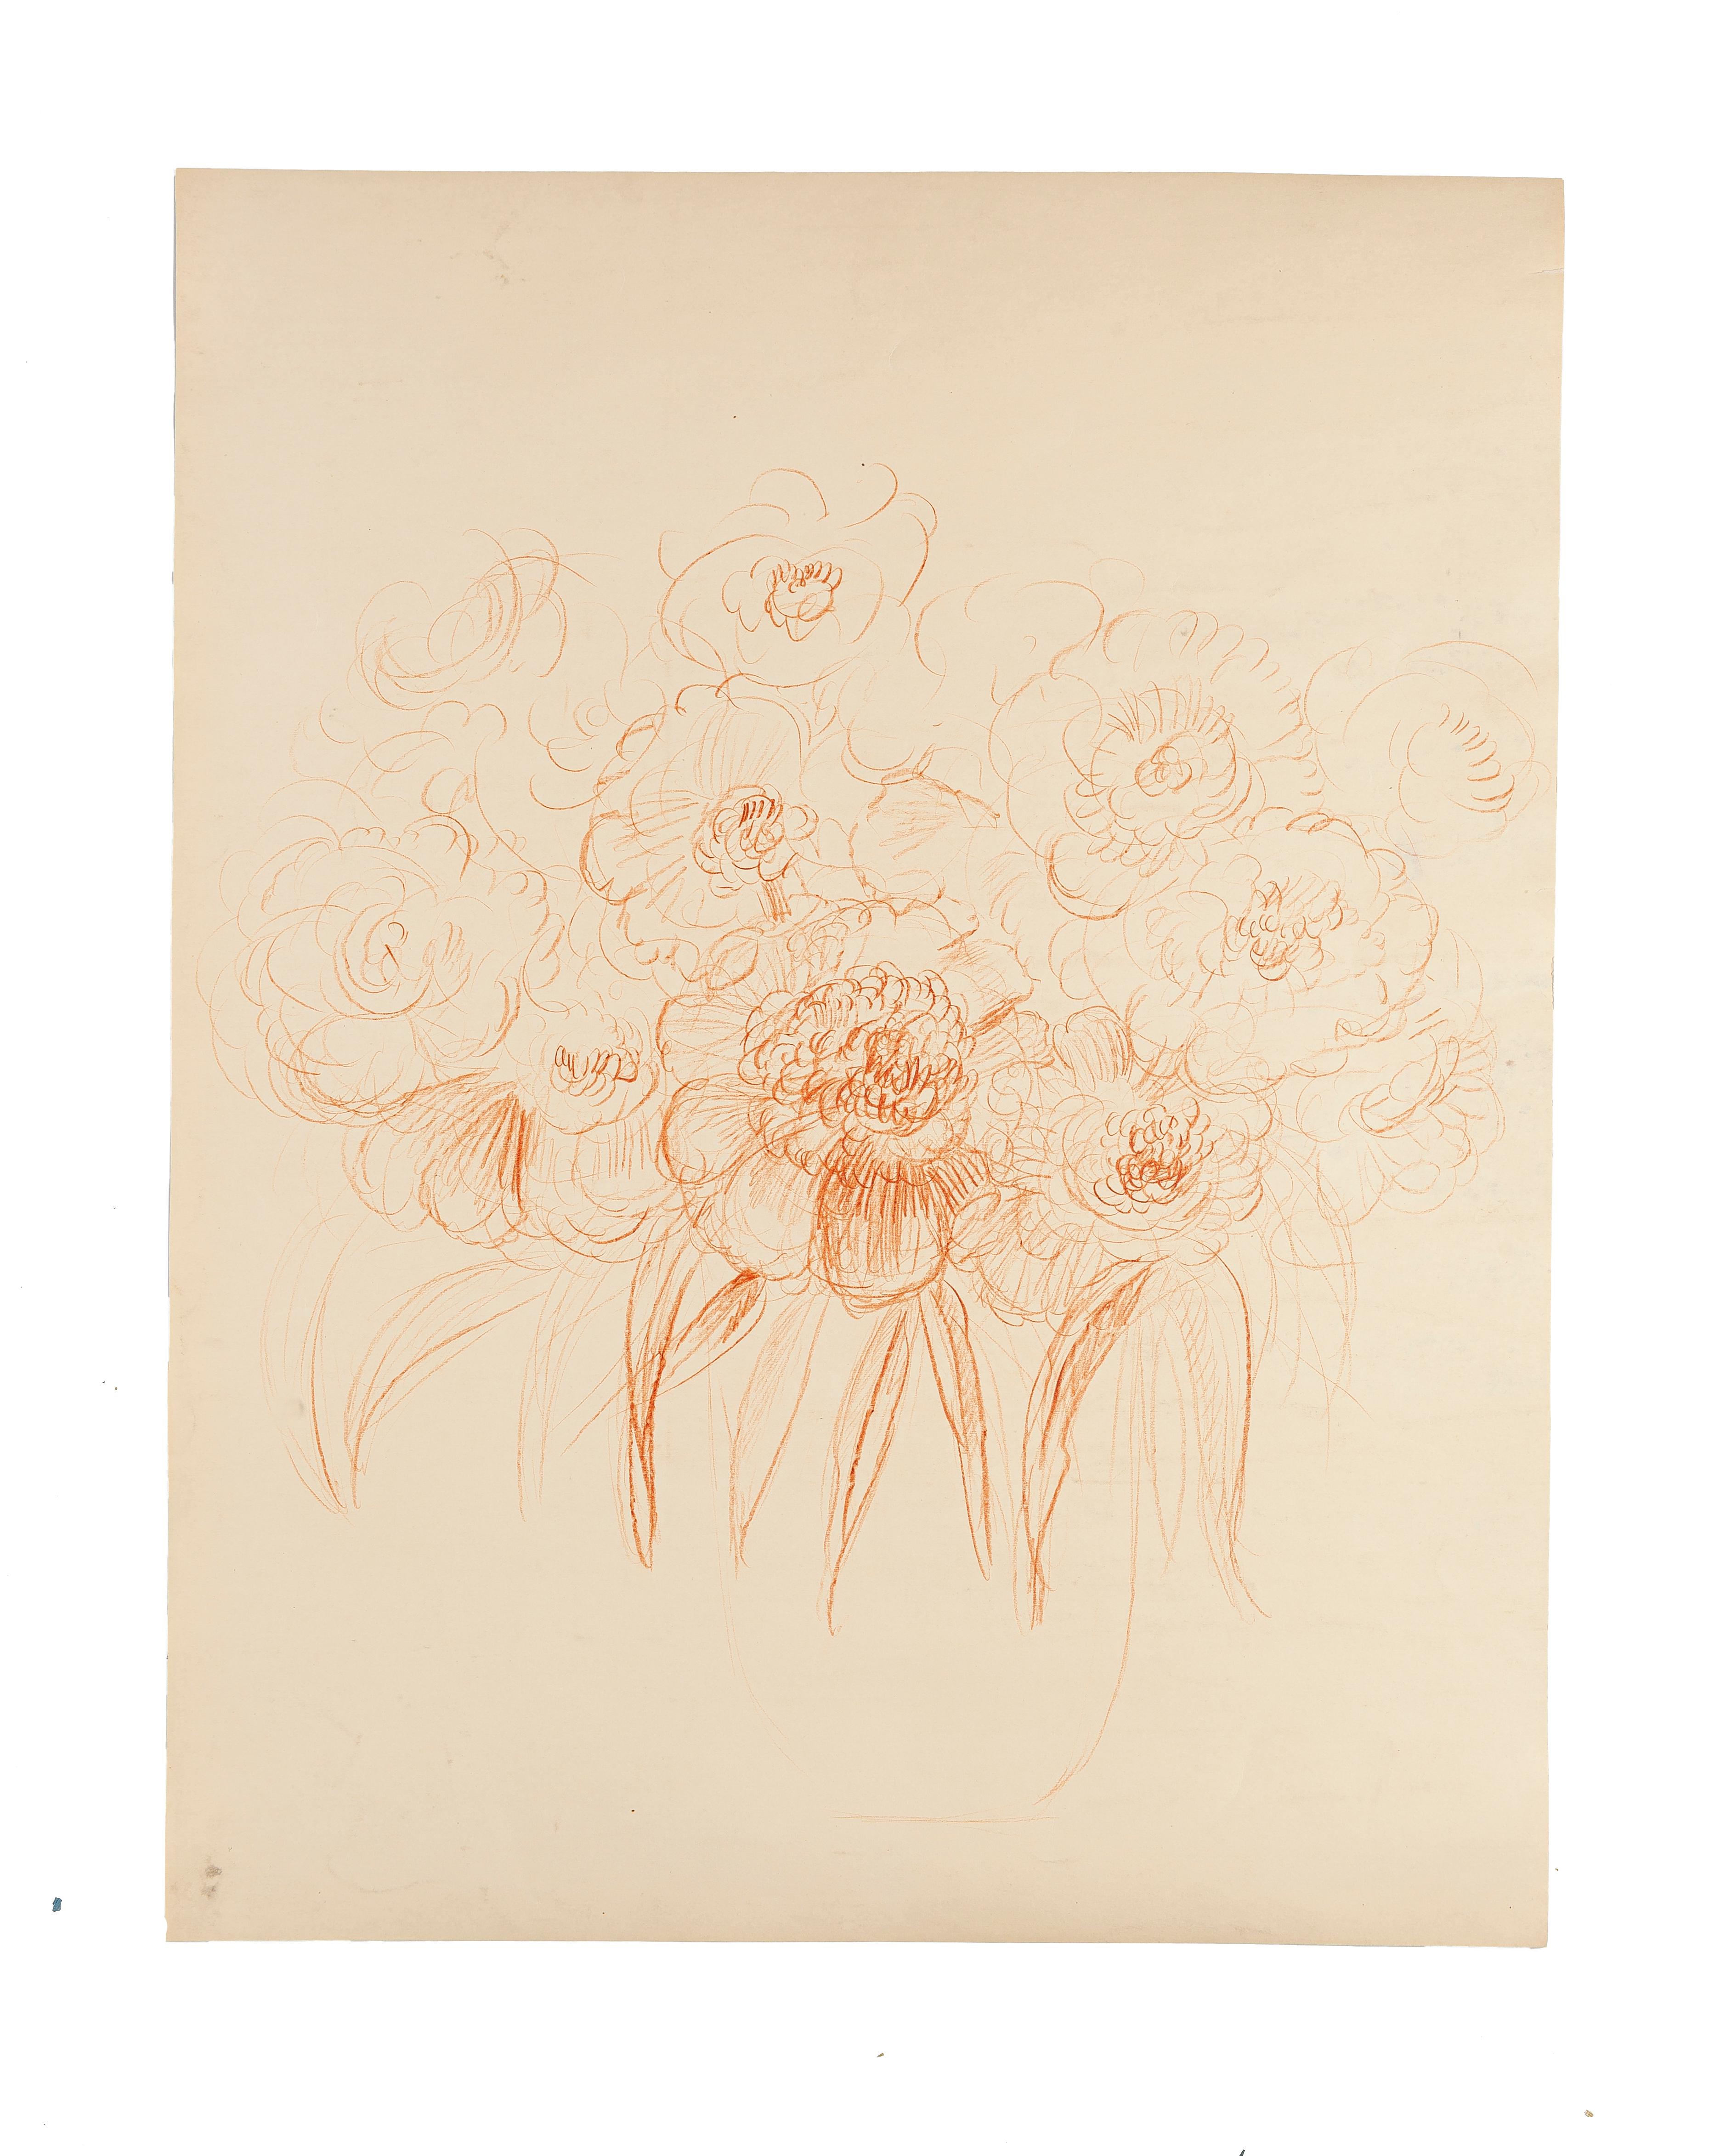 Flowers - Original Pastel Drawing by G. Bourgogne - mid 20th Century - Art by Gustave Bourgogne